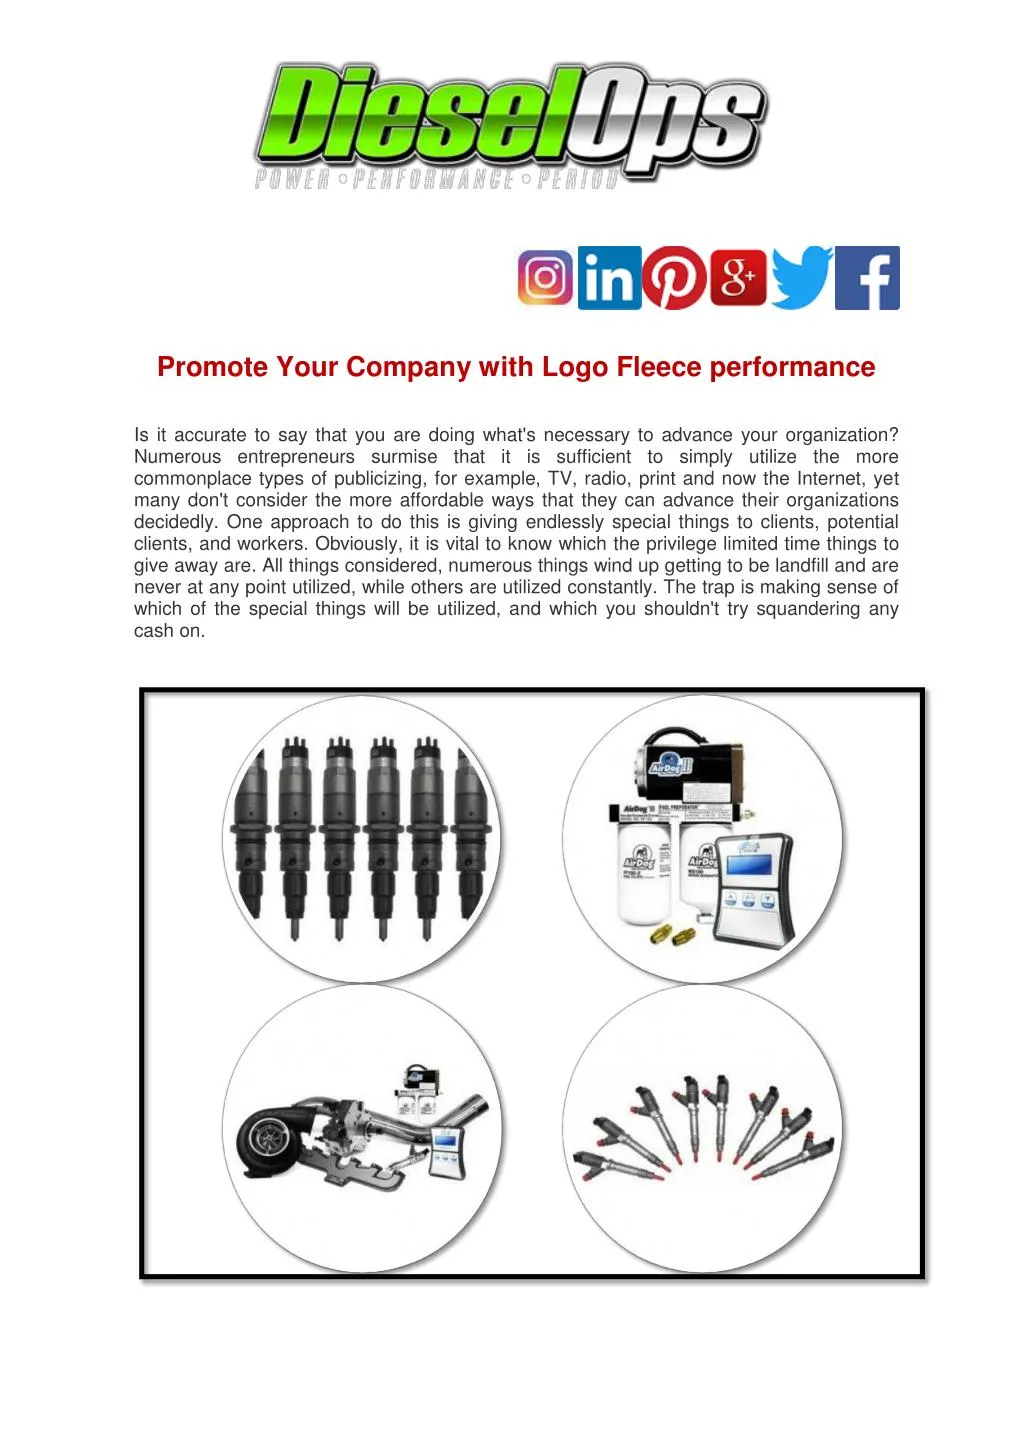 promote your company with logo fleece performance